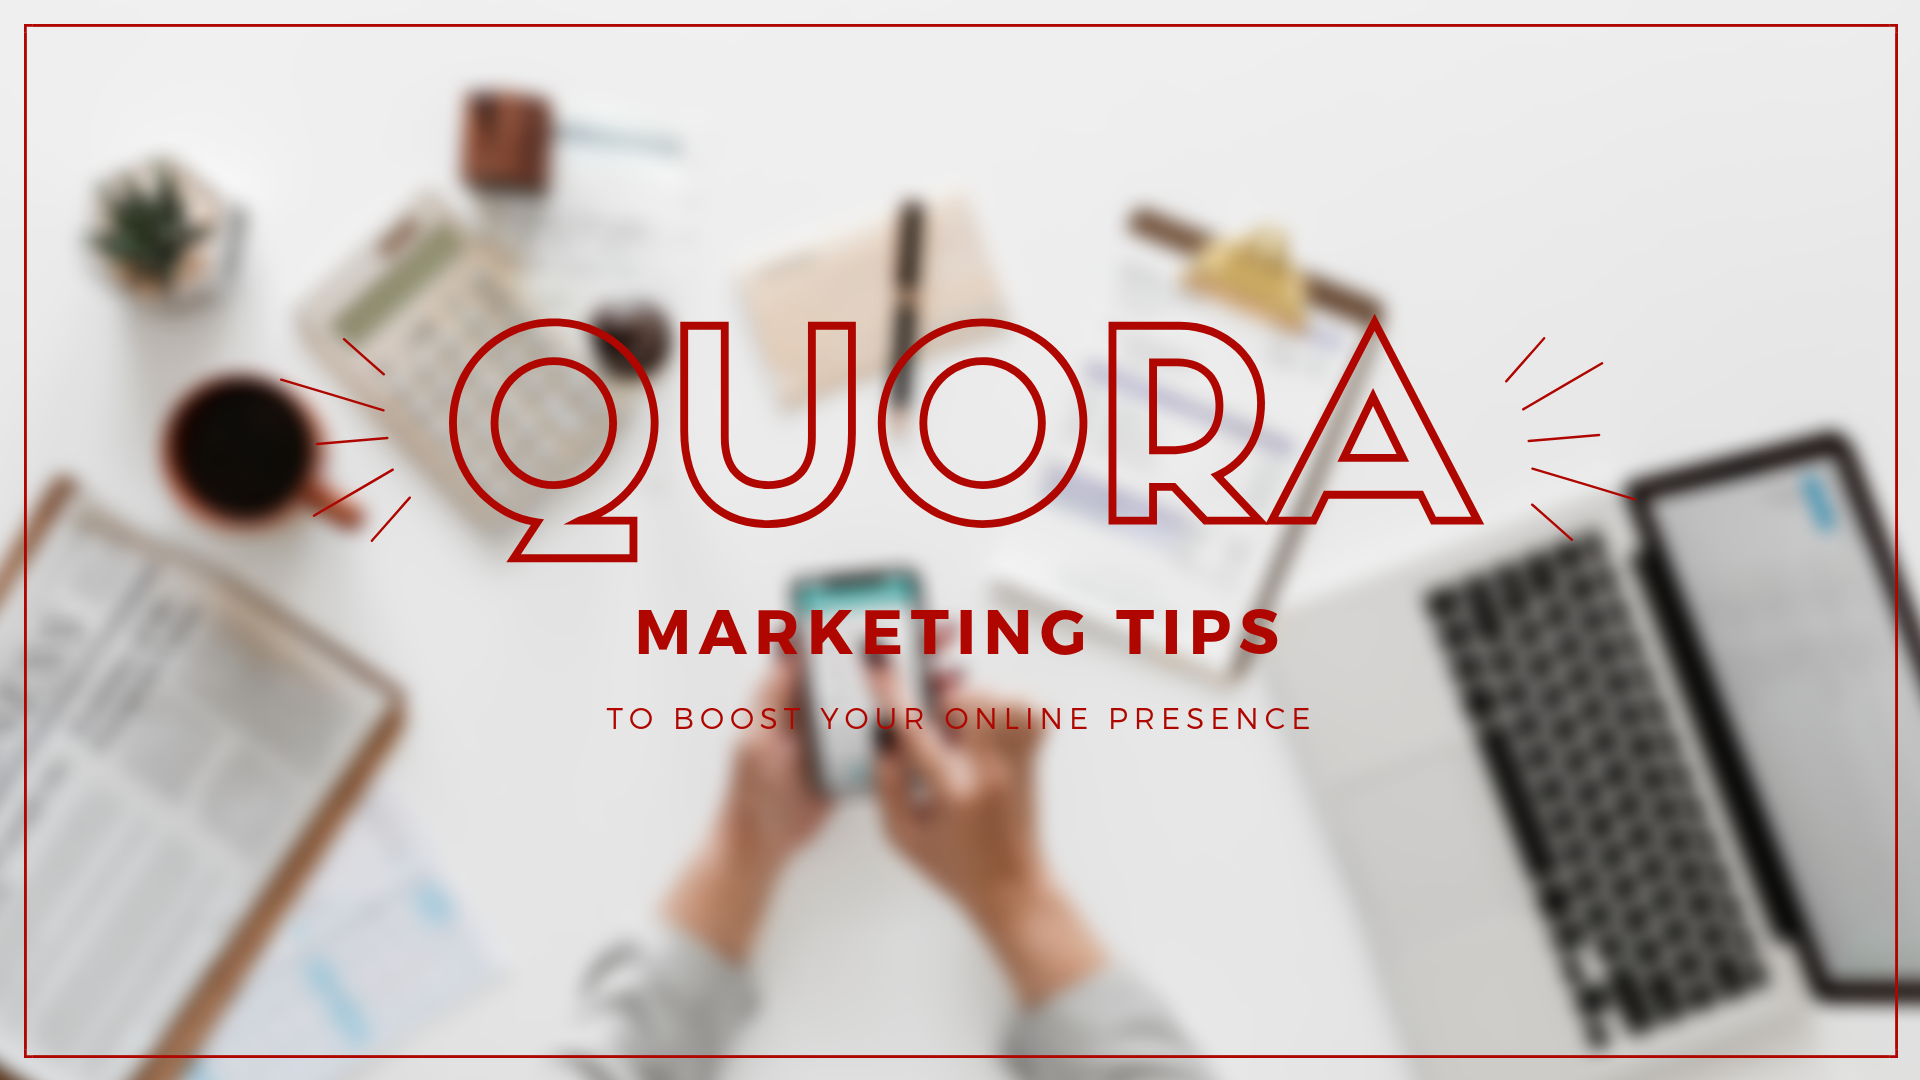 Quora Marketing Tips to Help Boost Your Online Presence via @heoricsearch